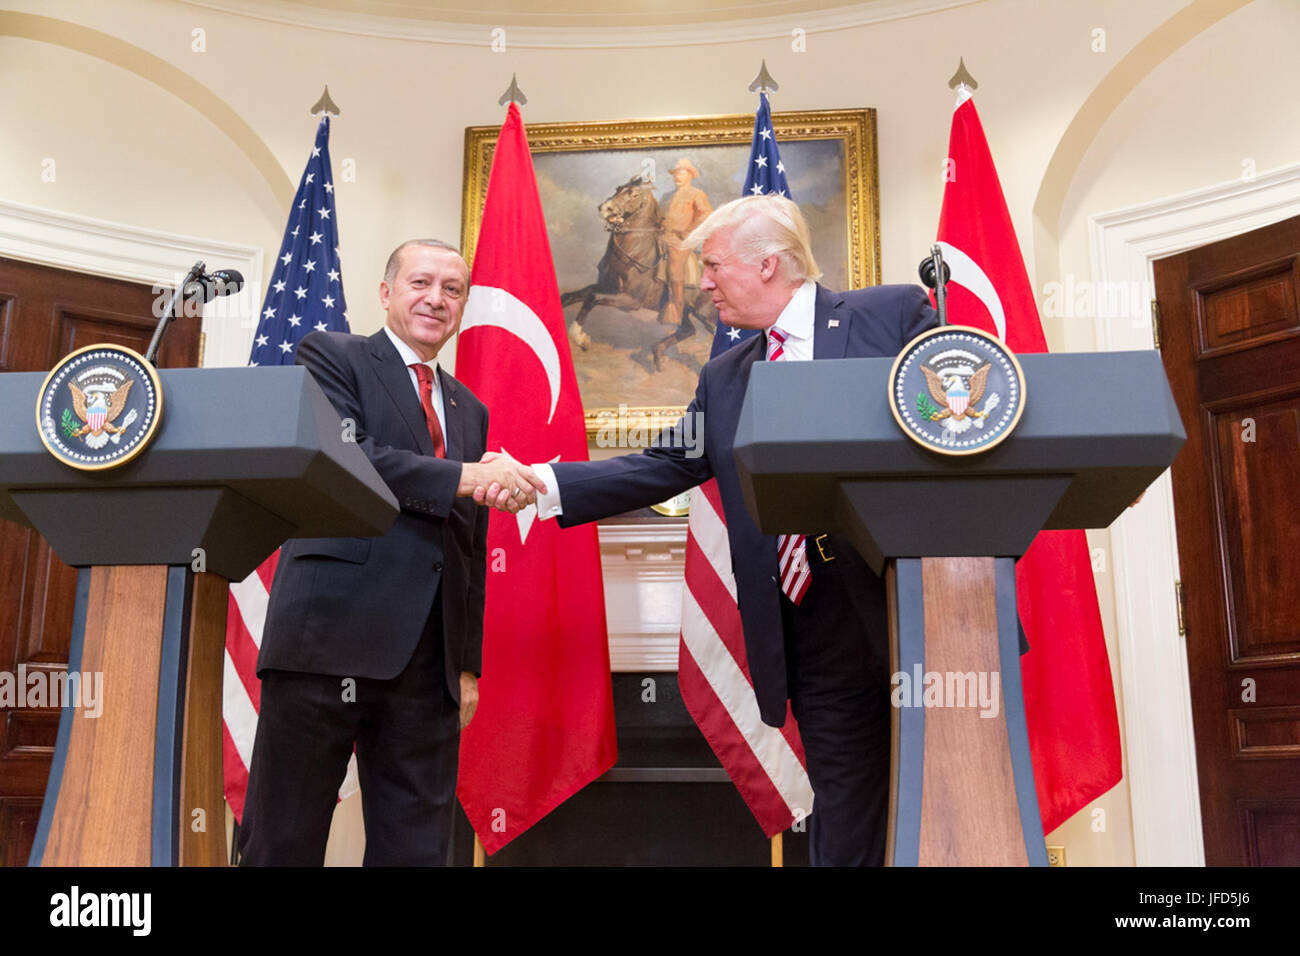 President Trump and President Erdoğan give a joint statement in the Roosevelt Room at the White House, Tuesday, May 16, 2017 in Washington, D.C. (Official White House Photo by Shealah Craighead). Stock Photo